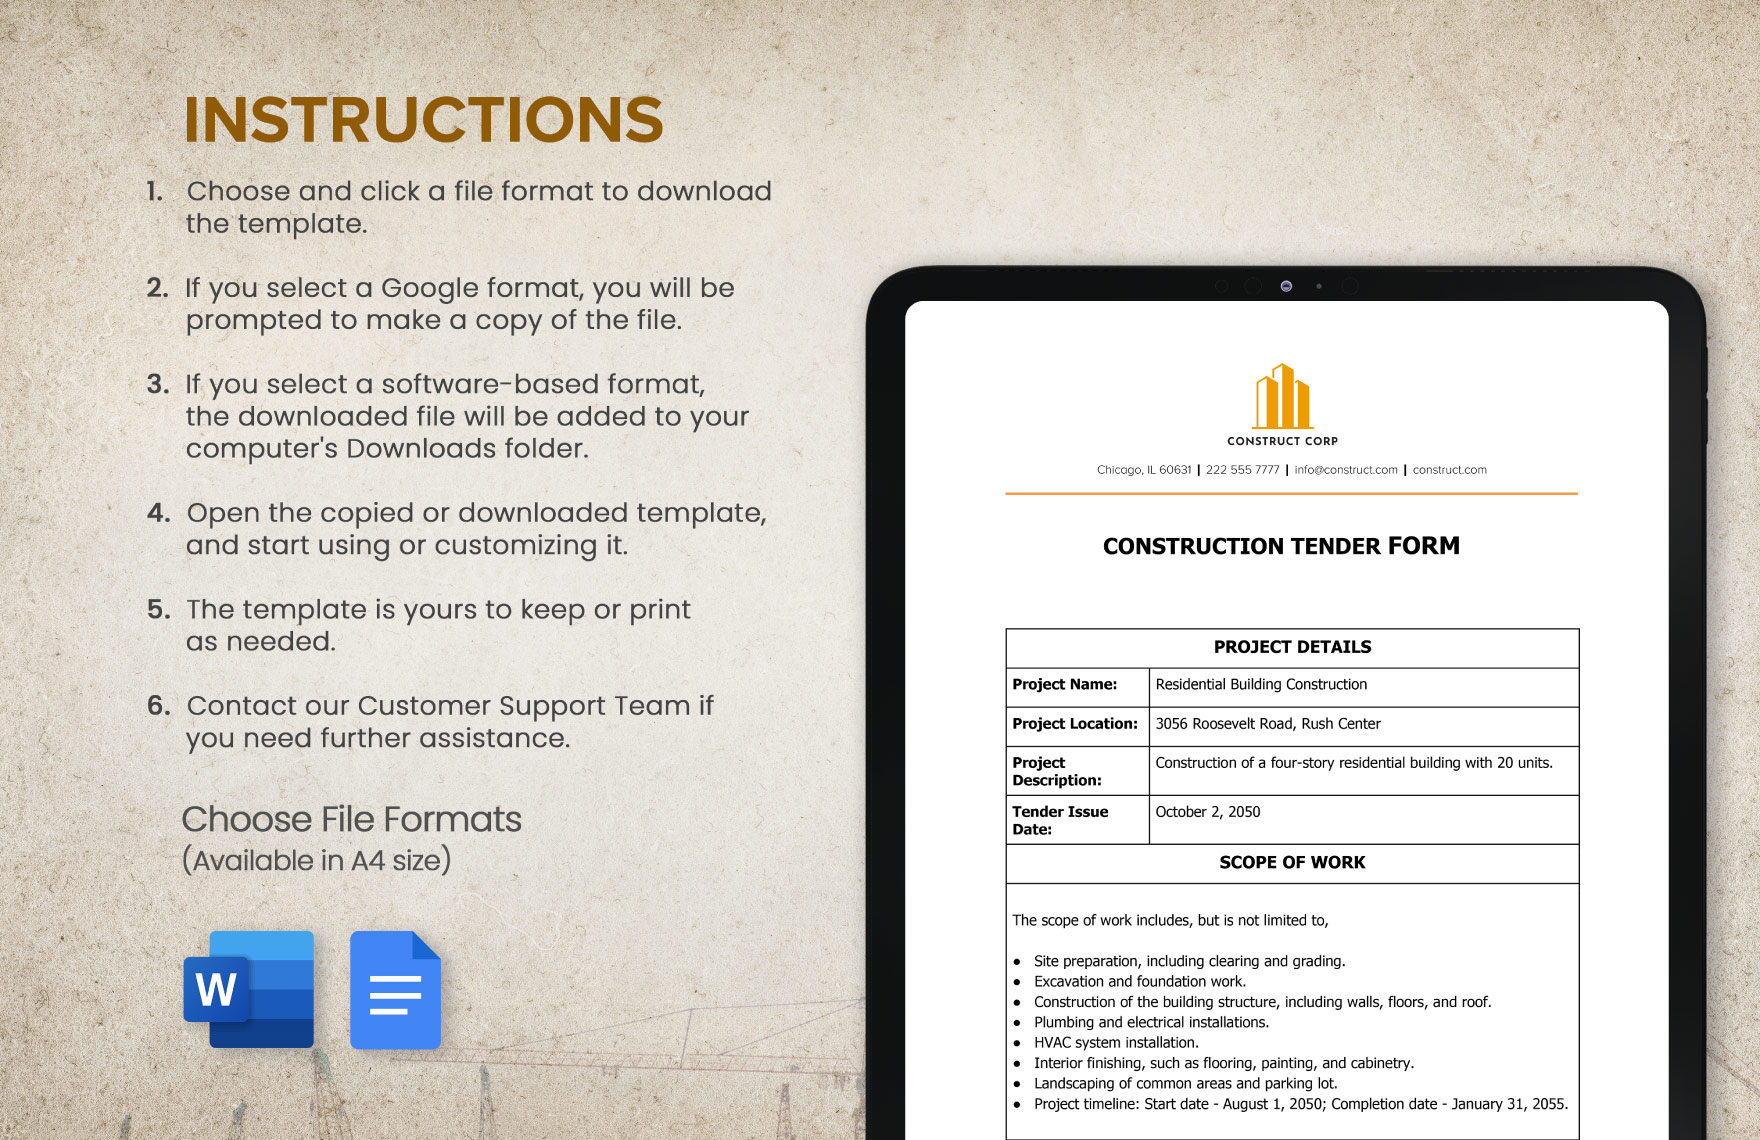 Construction Tender Form Template